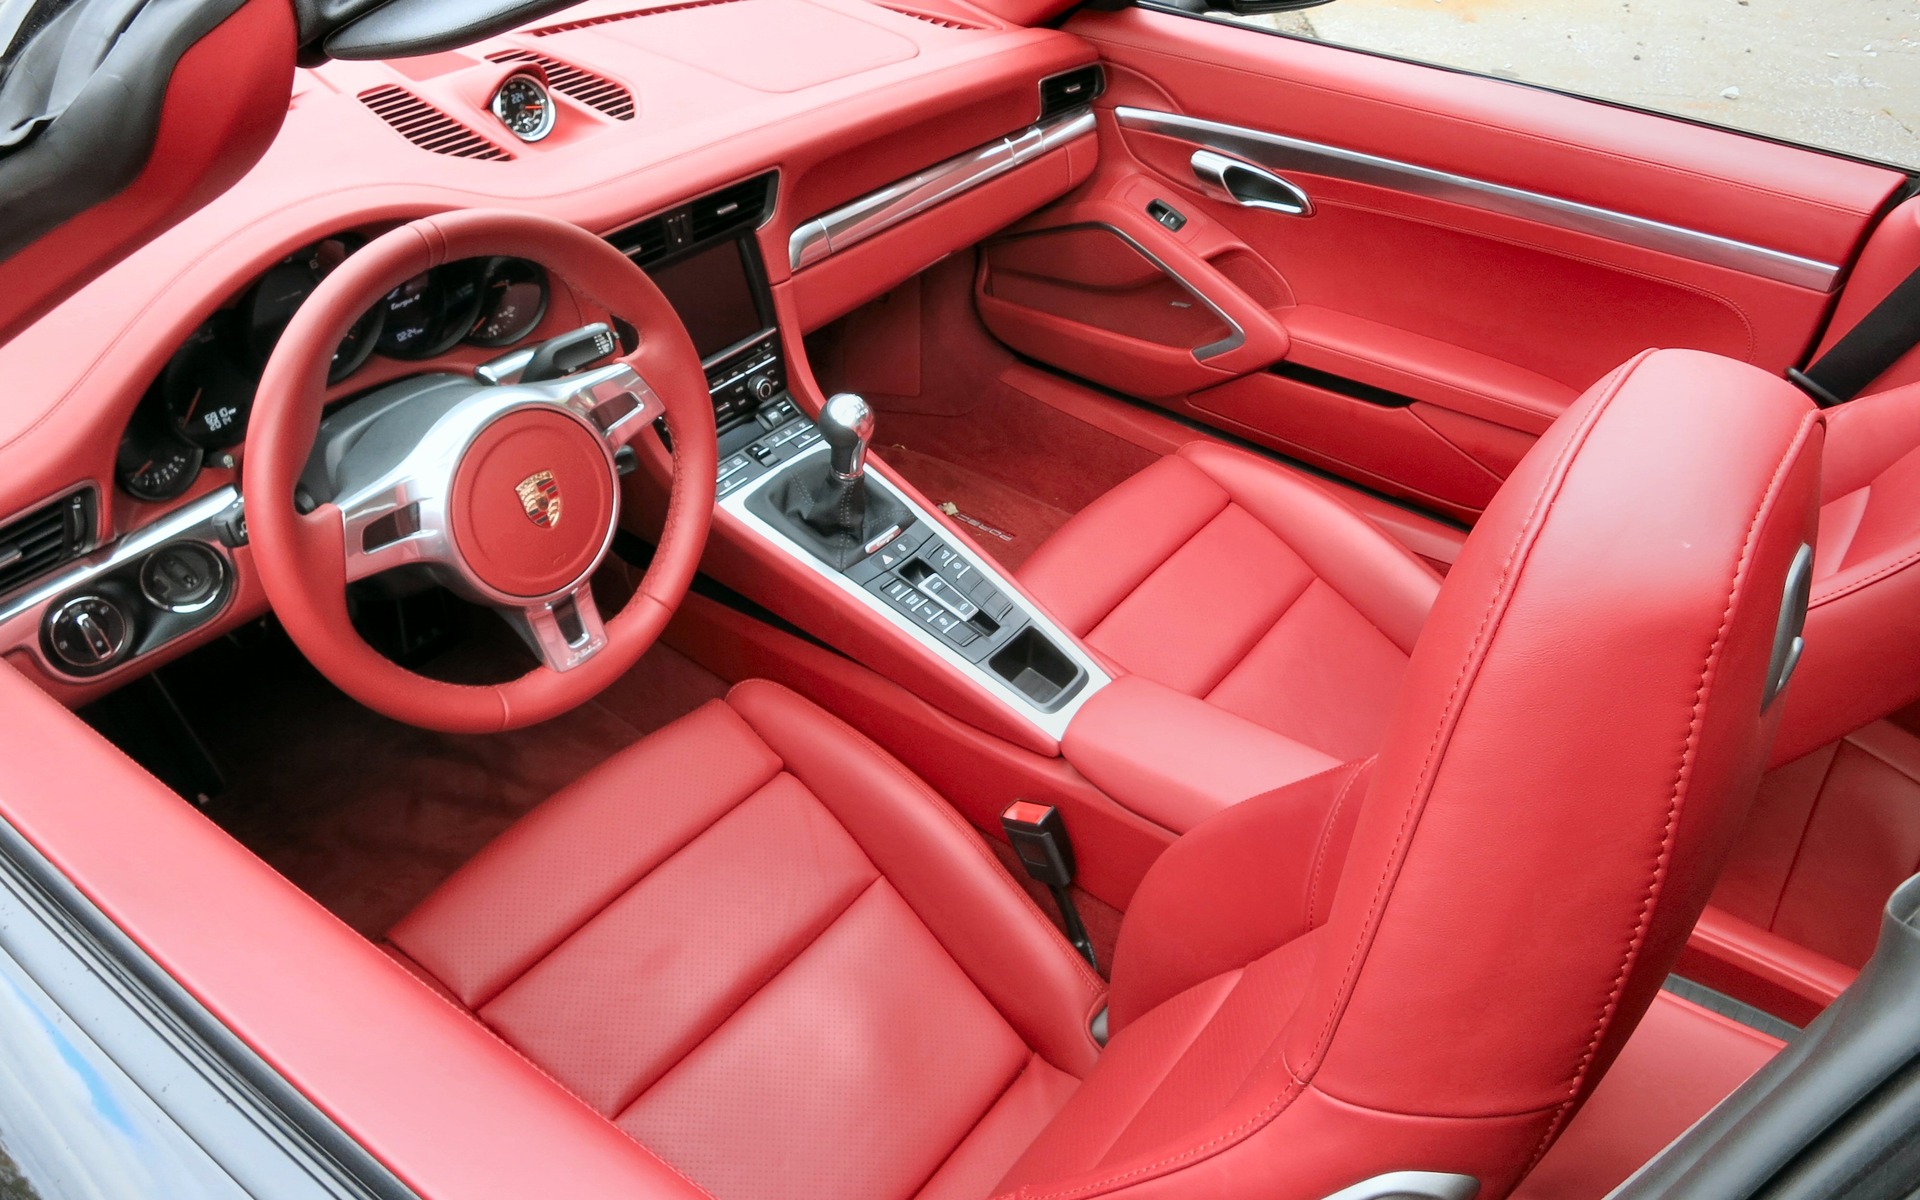 Red, red, red everywhere inside the Targa 4.